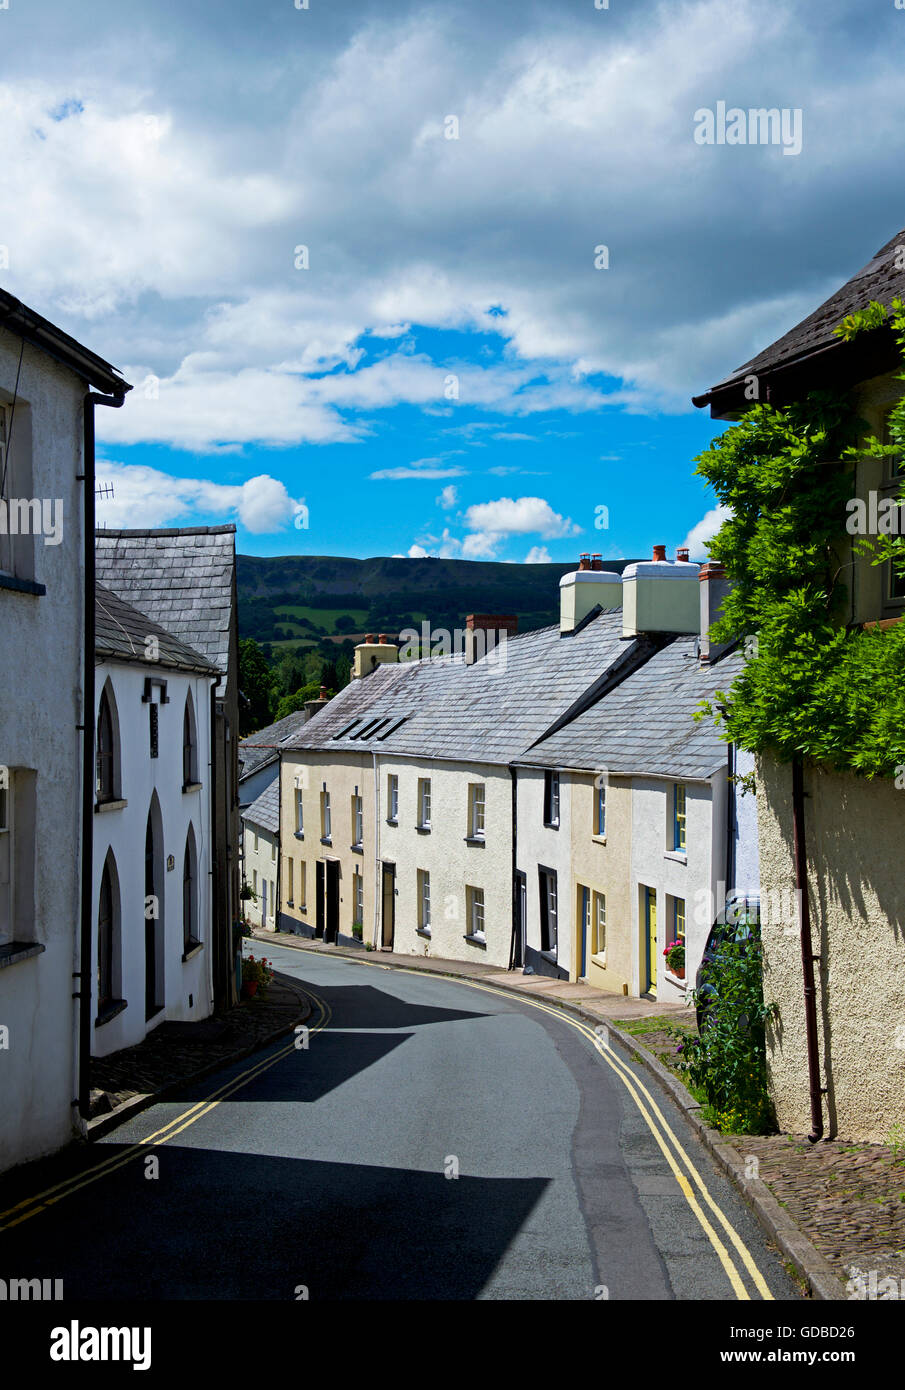 Street of terraced houses in the village of Crickhowell, Powys, Wales UK Stock Photo